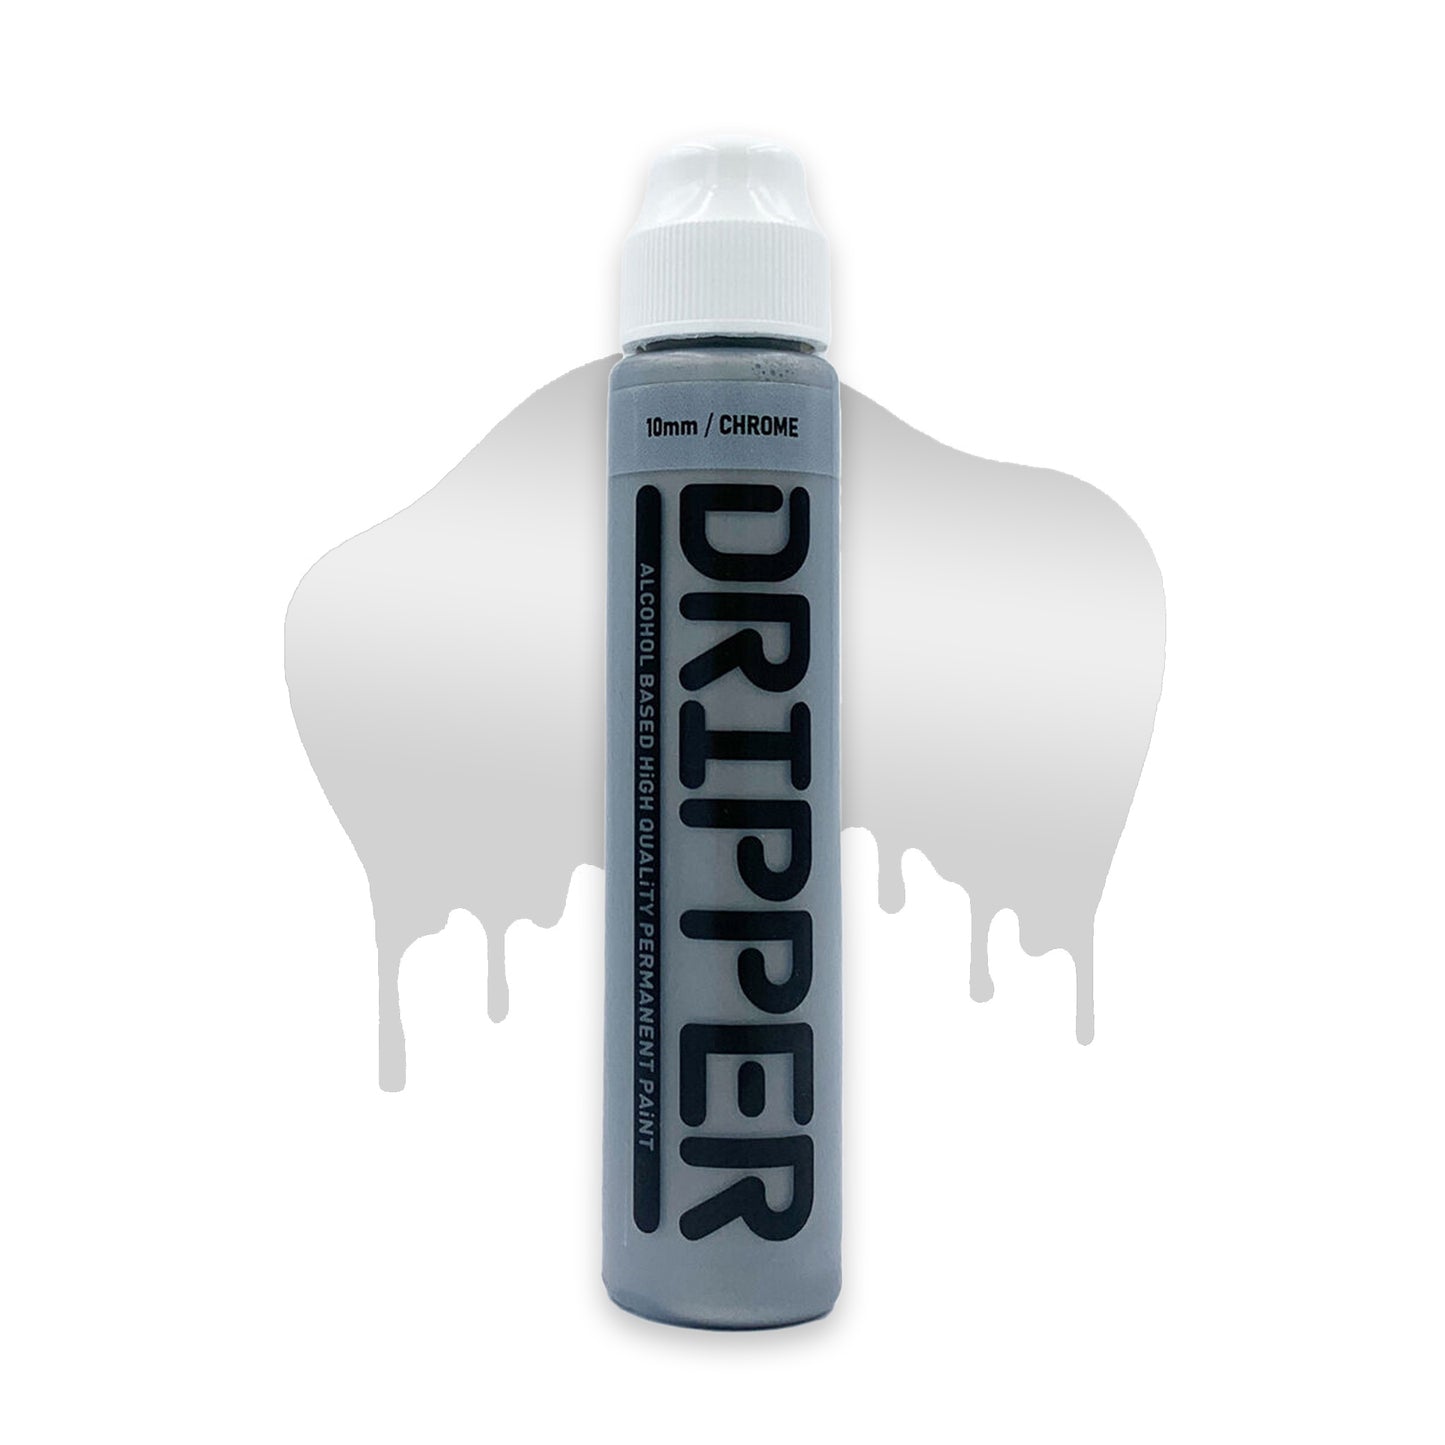 chrome mop container with white cap and the word "Dripper" written on the face in a bold black font. The mop is positioned in front of a white background with drips that match the chrome color of the mop.